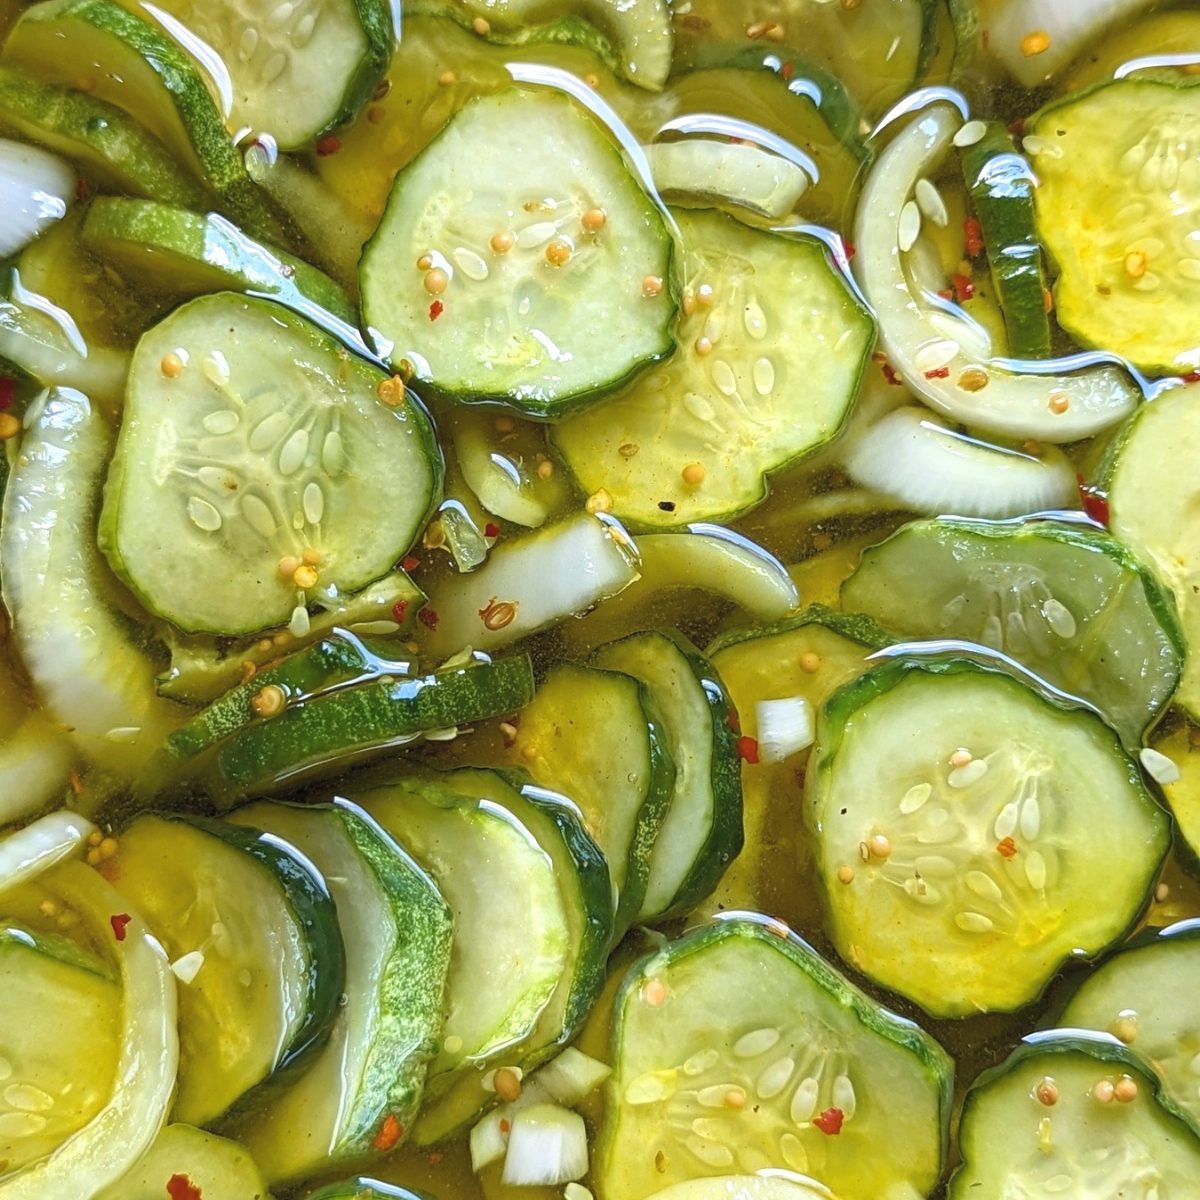 bucket pickles with cucumbers and turmeric sweet quick bread and butter pickles for a 5 gallon pail